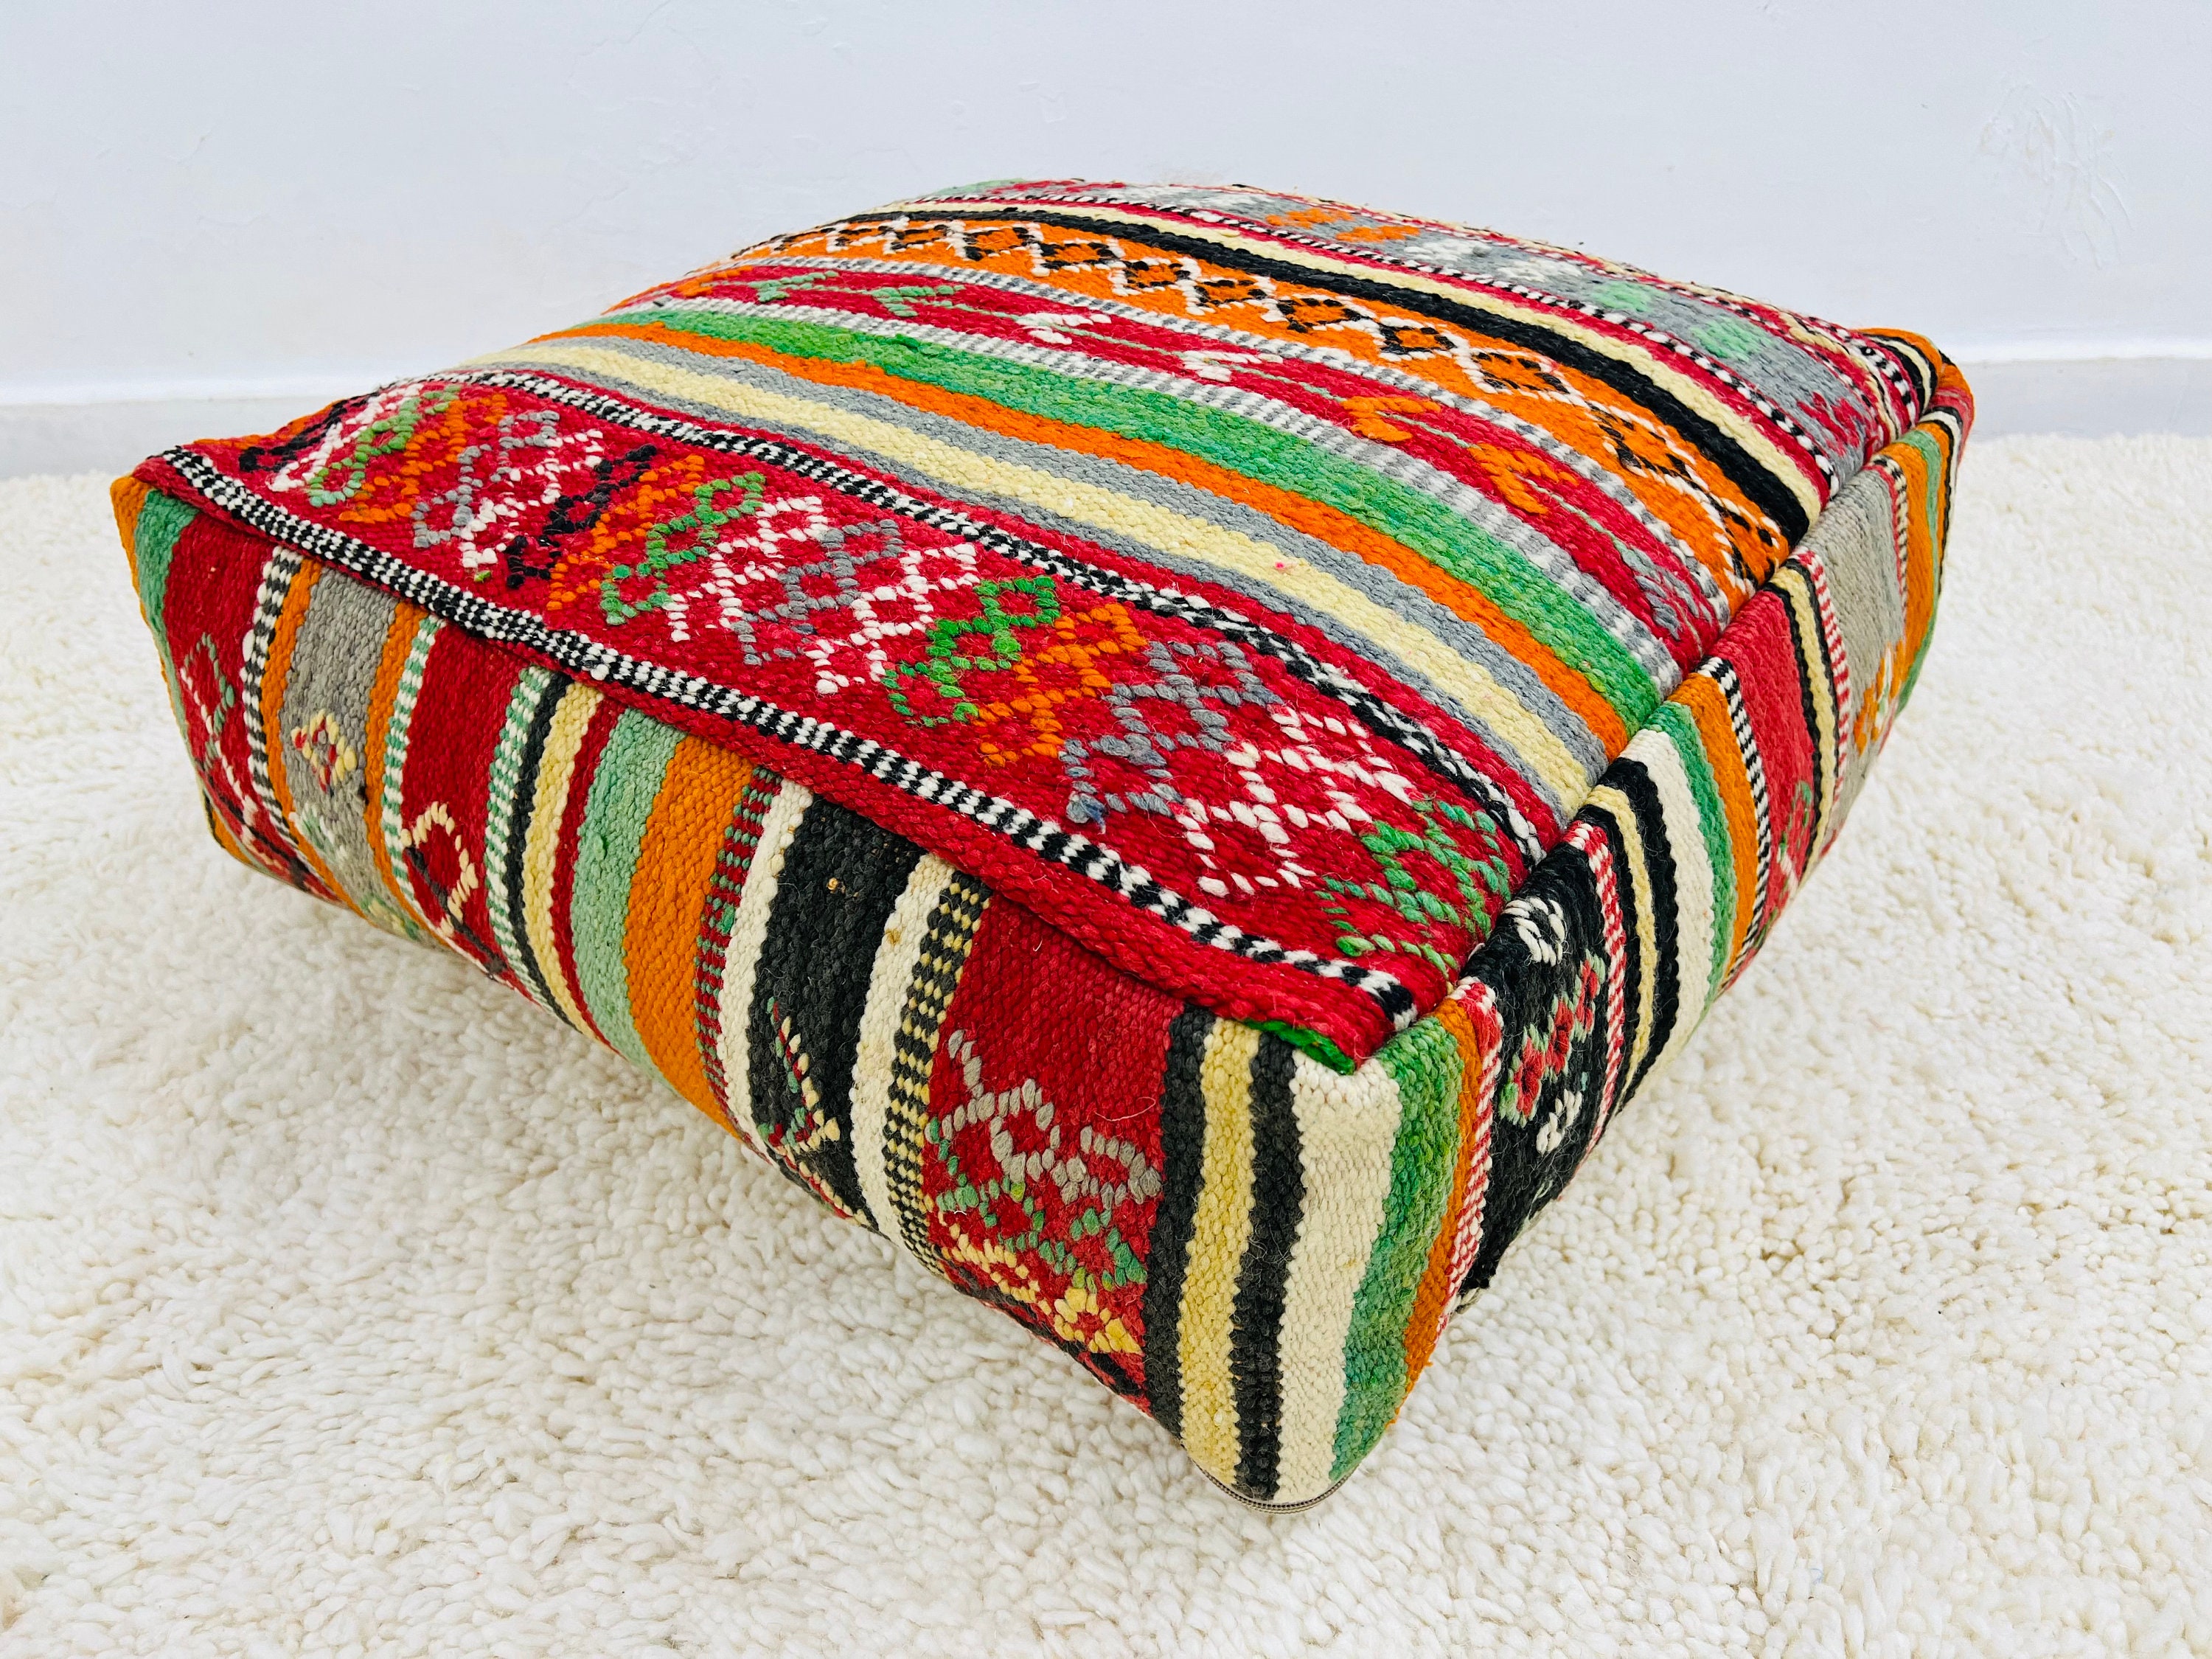 Wool Pouf-Boho Pouffe-Kilim Cover Cushion-Ottoman Footstool Cover-24 X 24 8 Inches